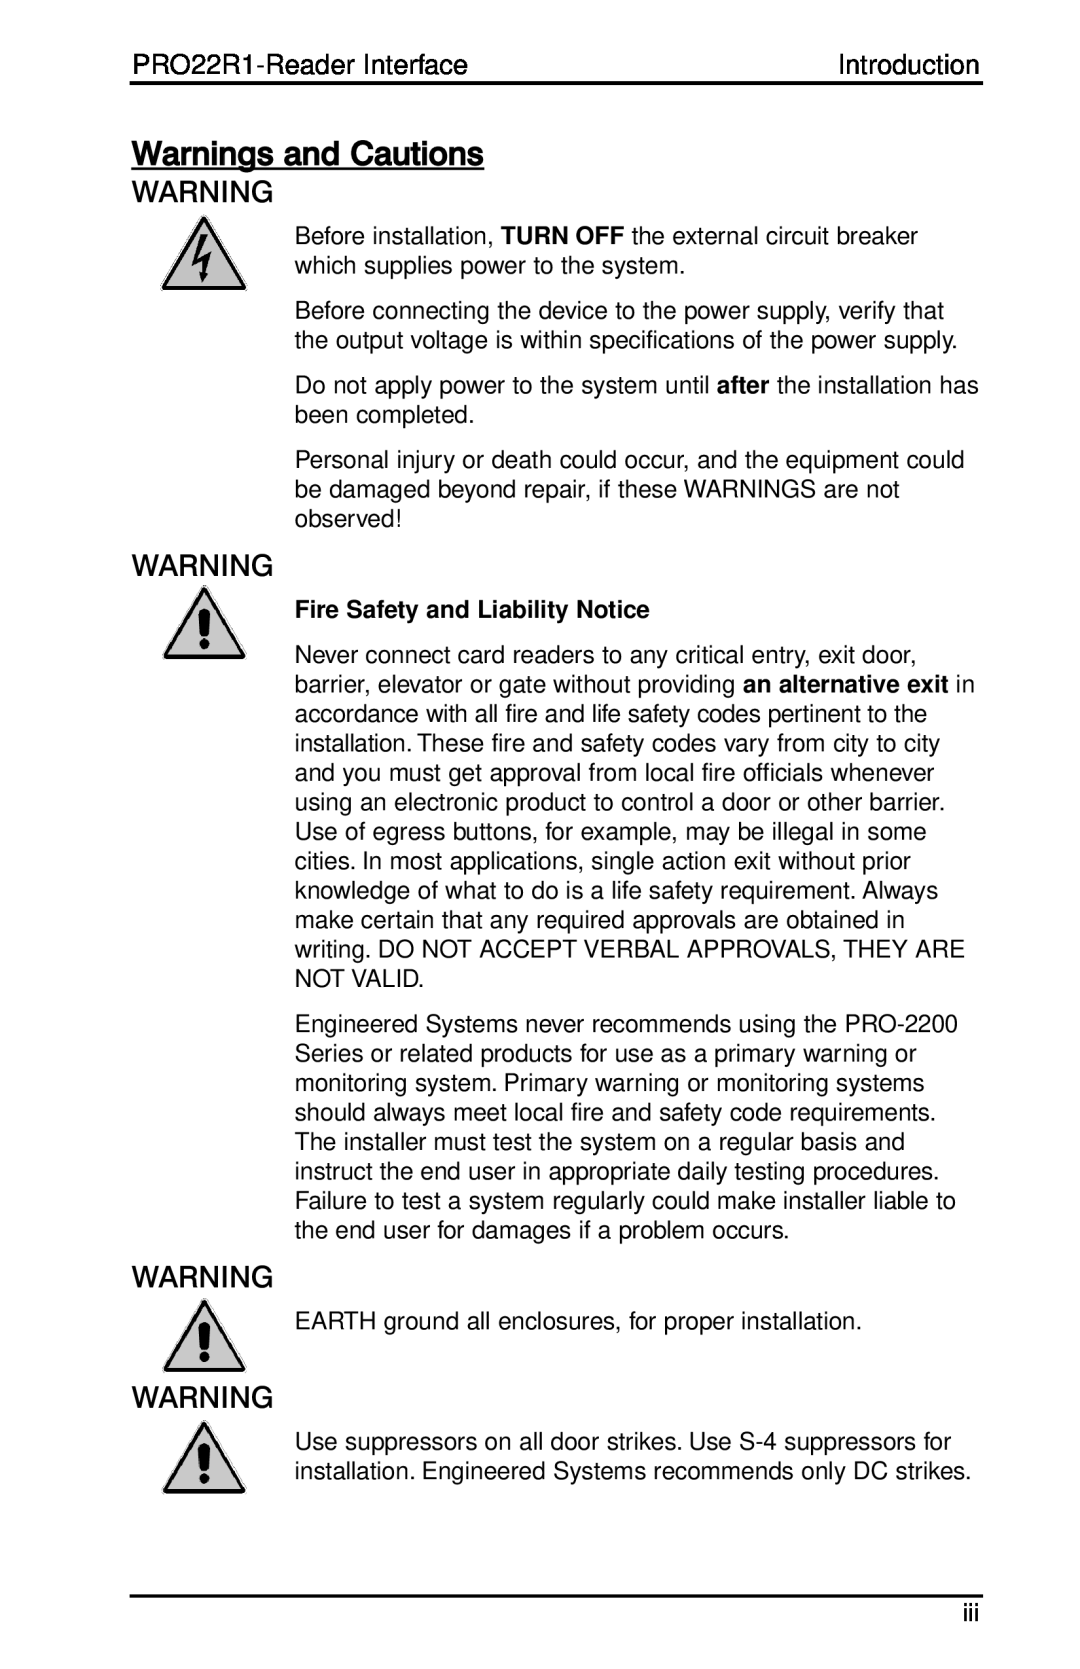 Honeywell PRO-2200 installation manual Warnings and Cautions, Fire Safety and Liability Notice 